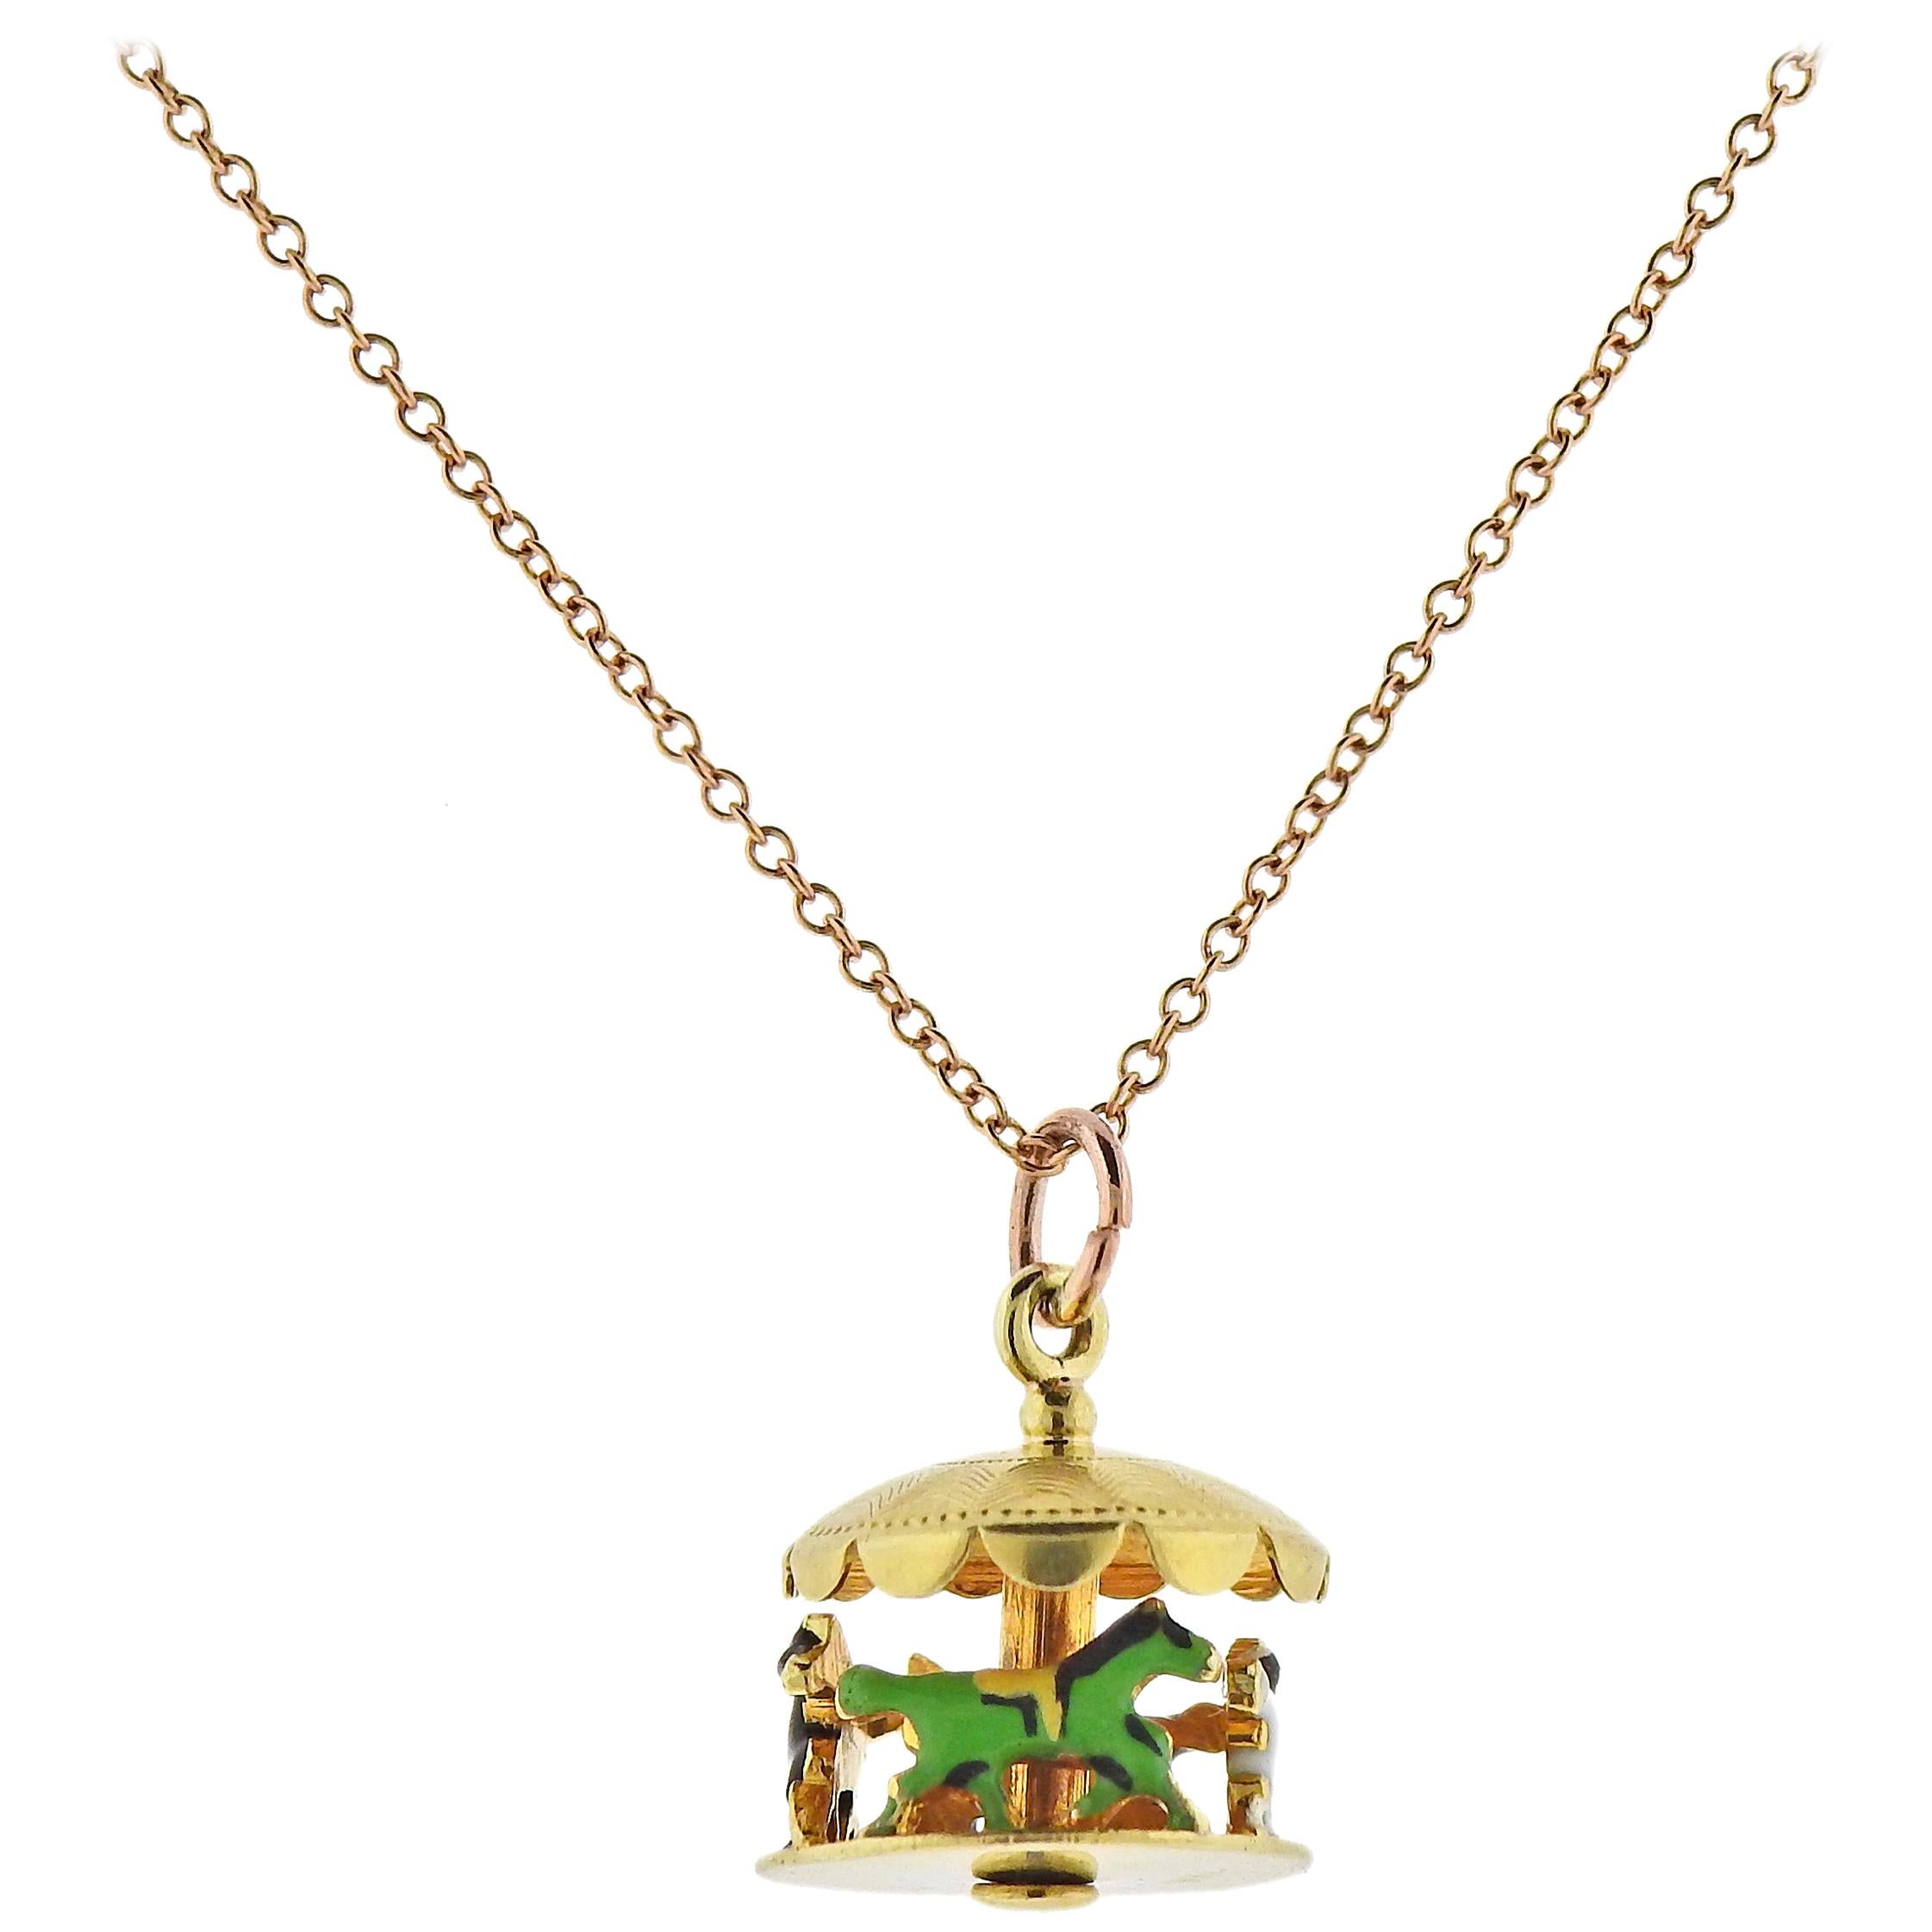 Tiffany & Co. Necklace with Enamel Carousel Pendant Charm